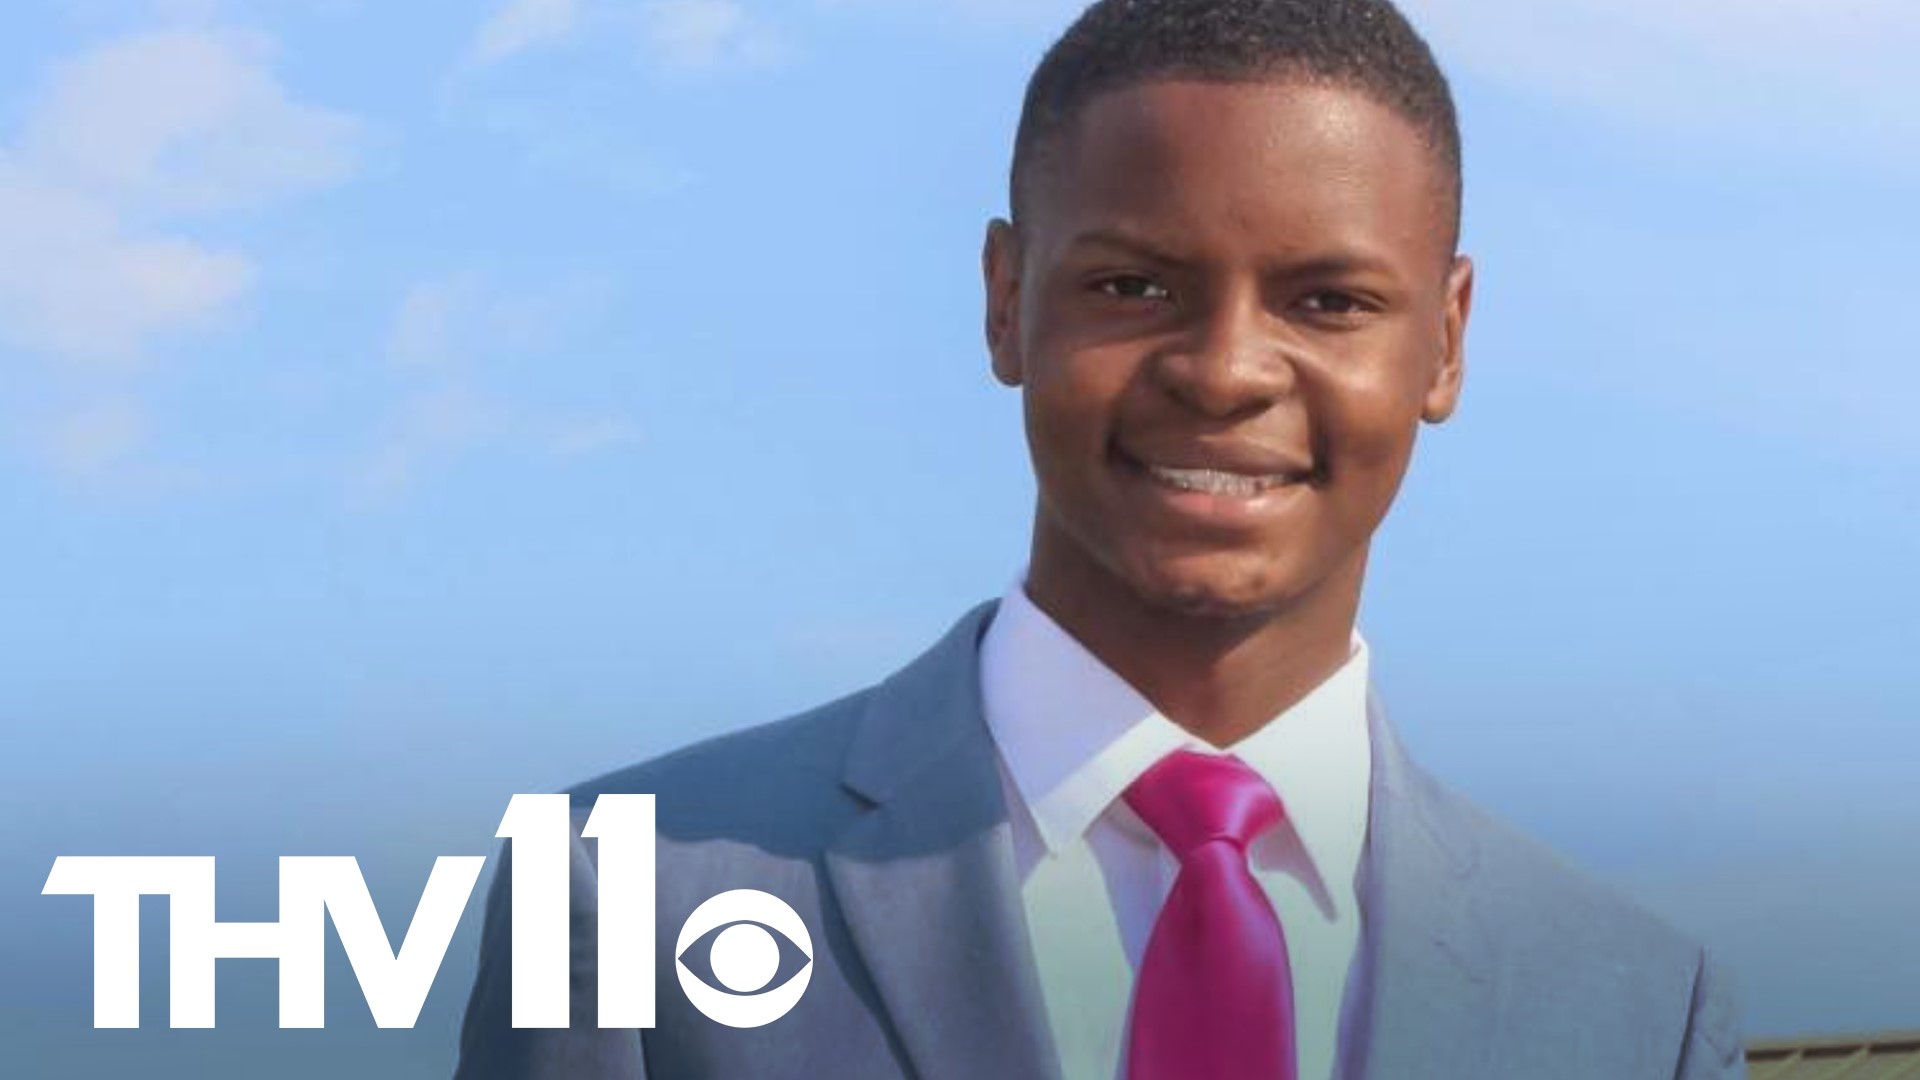 The small town of Earle, Arkansas has elected the youngest Black mayor in the United States.